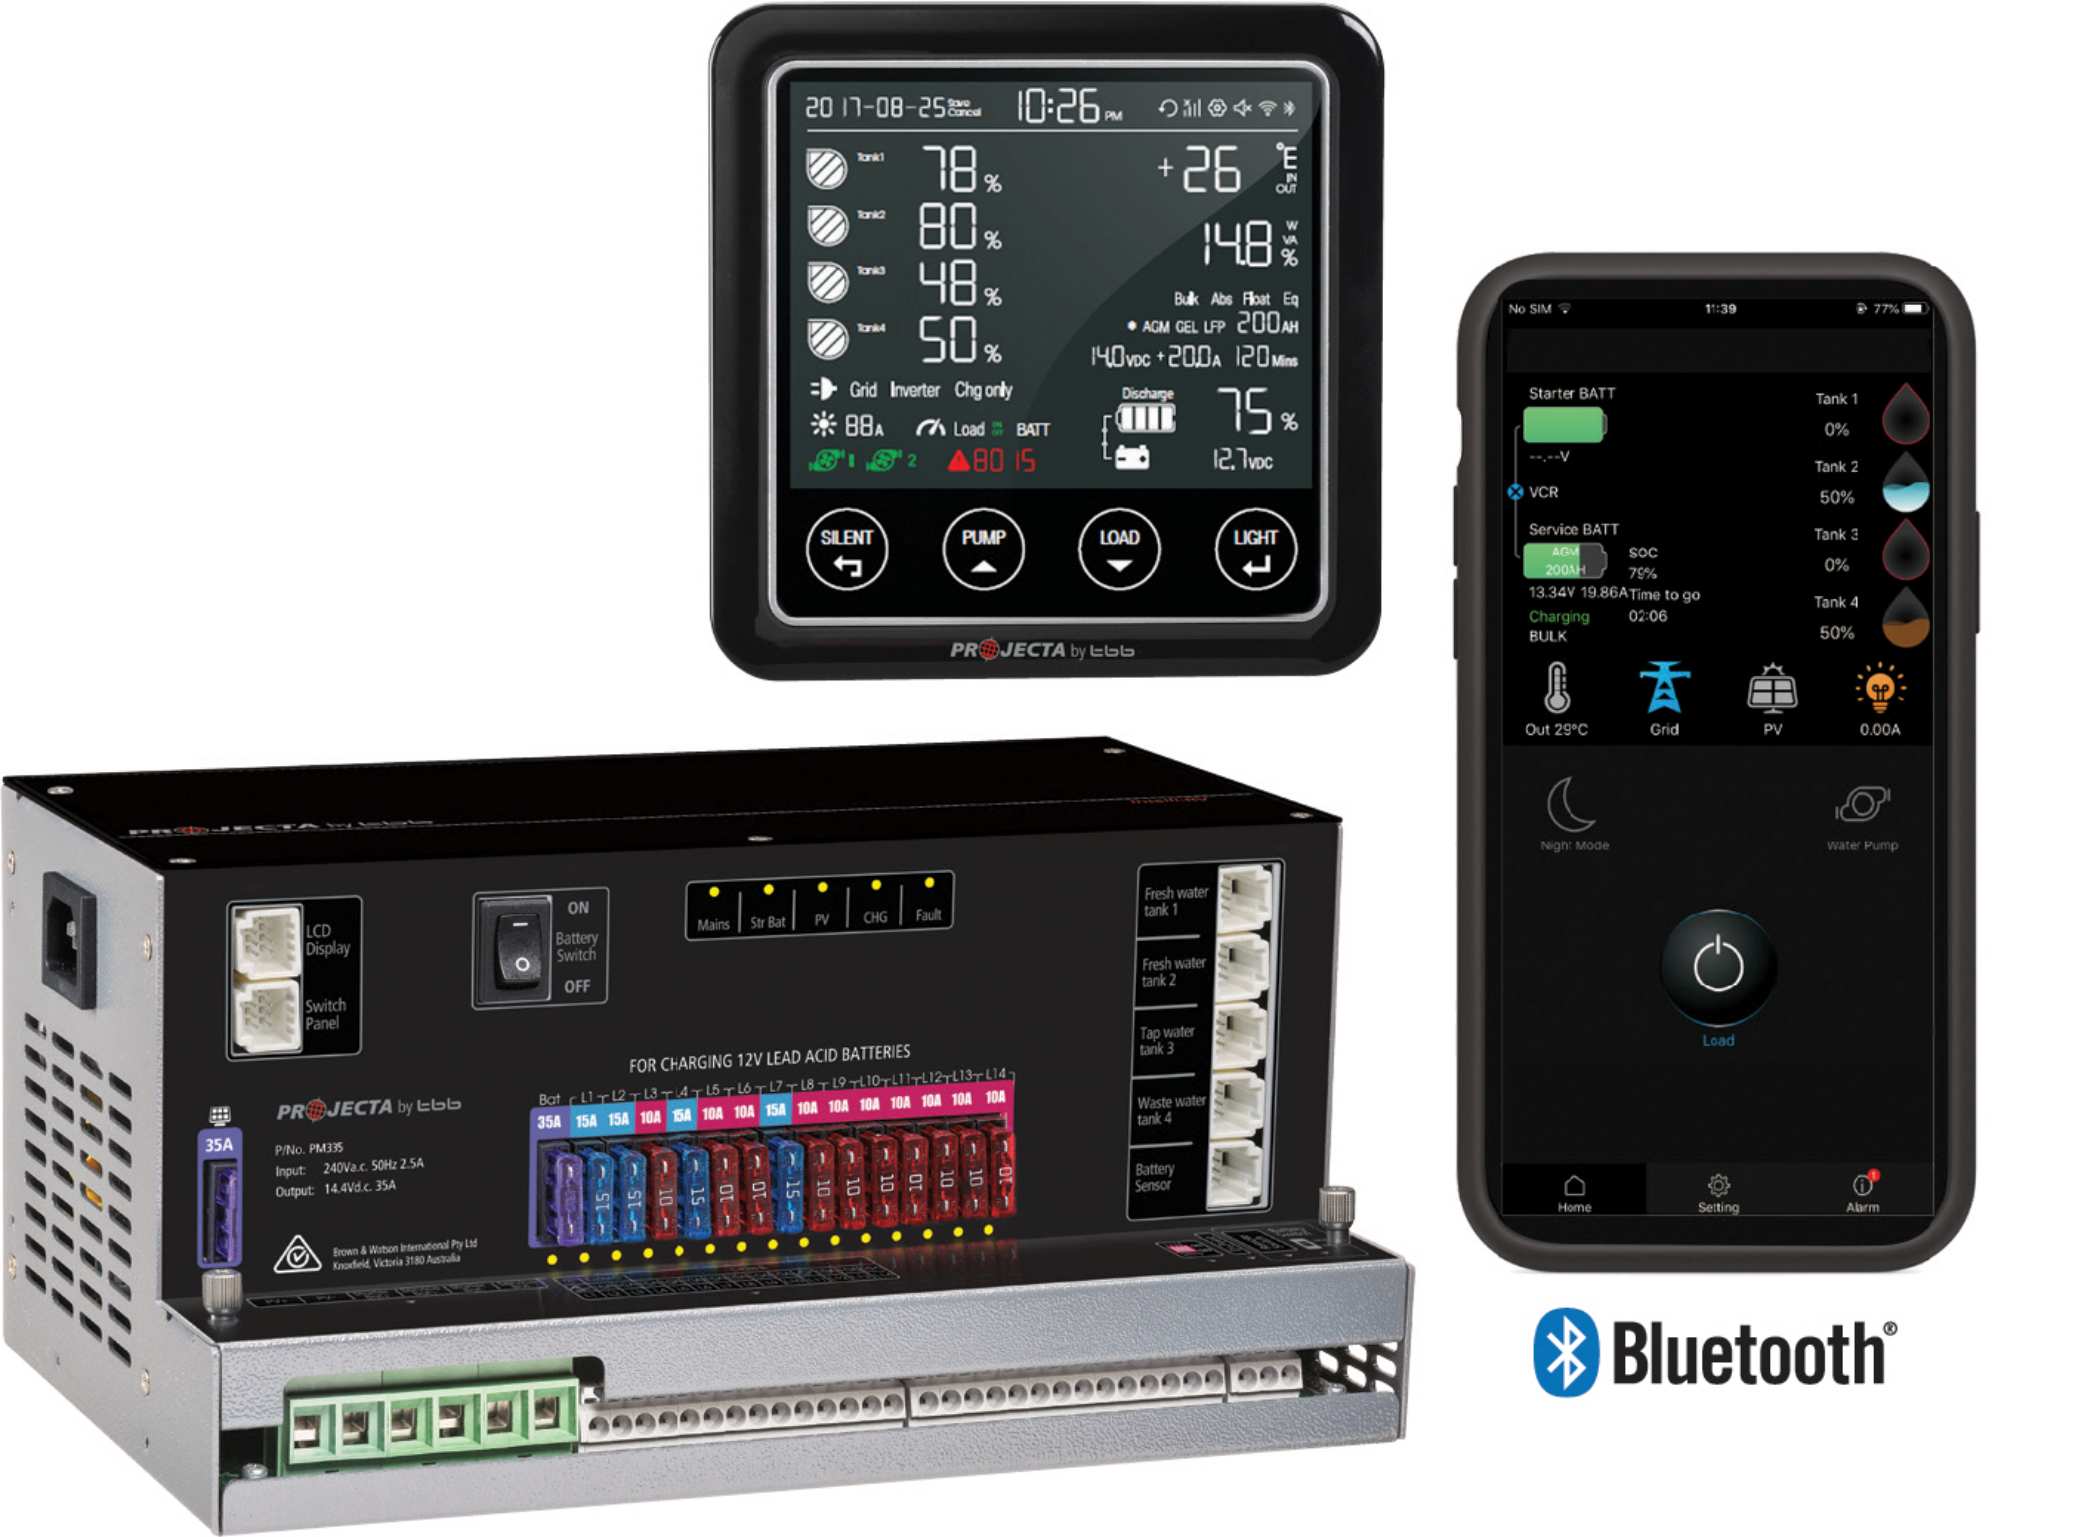 RV and Caravan power management systems include a Bluetooth compatible model – PM300-BT.